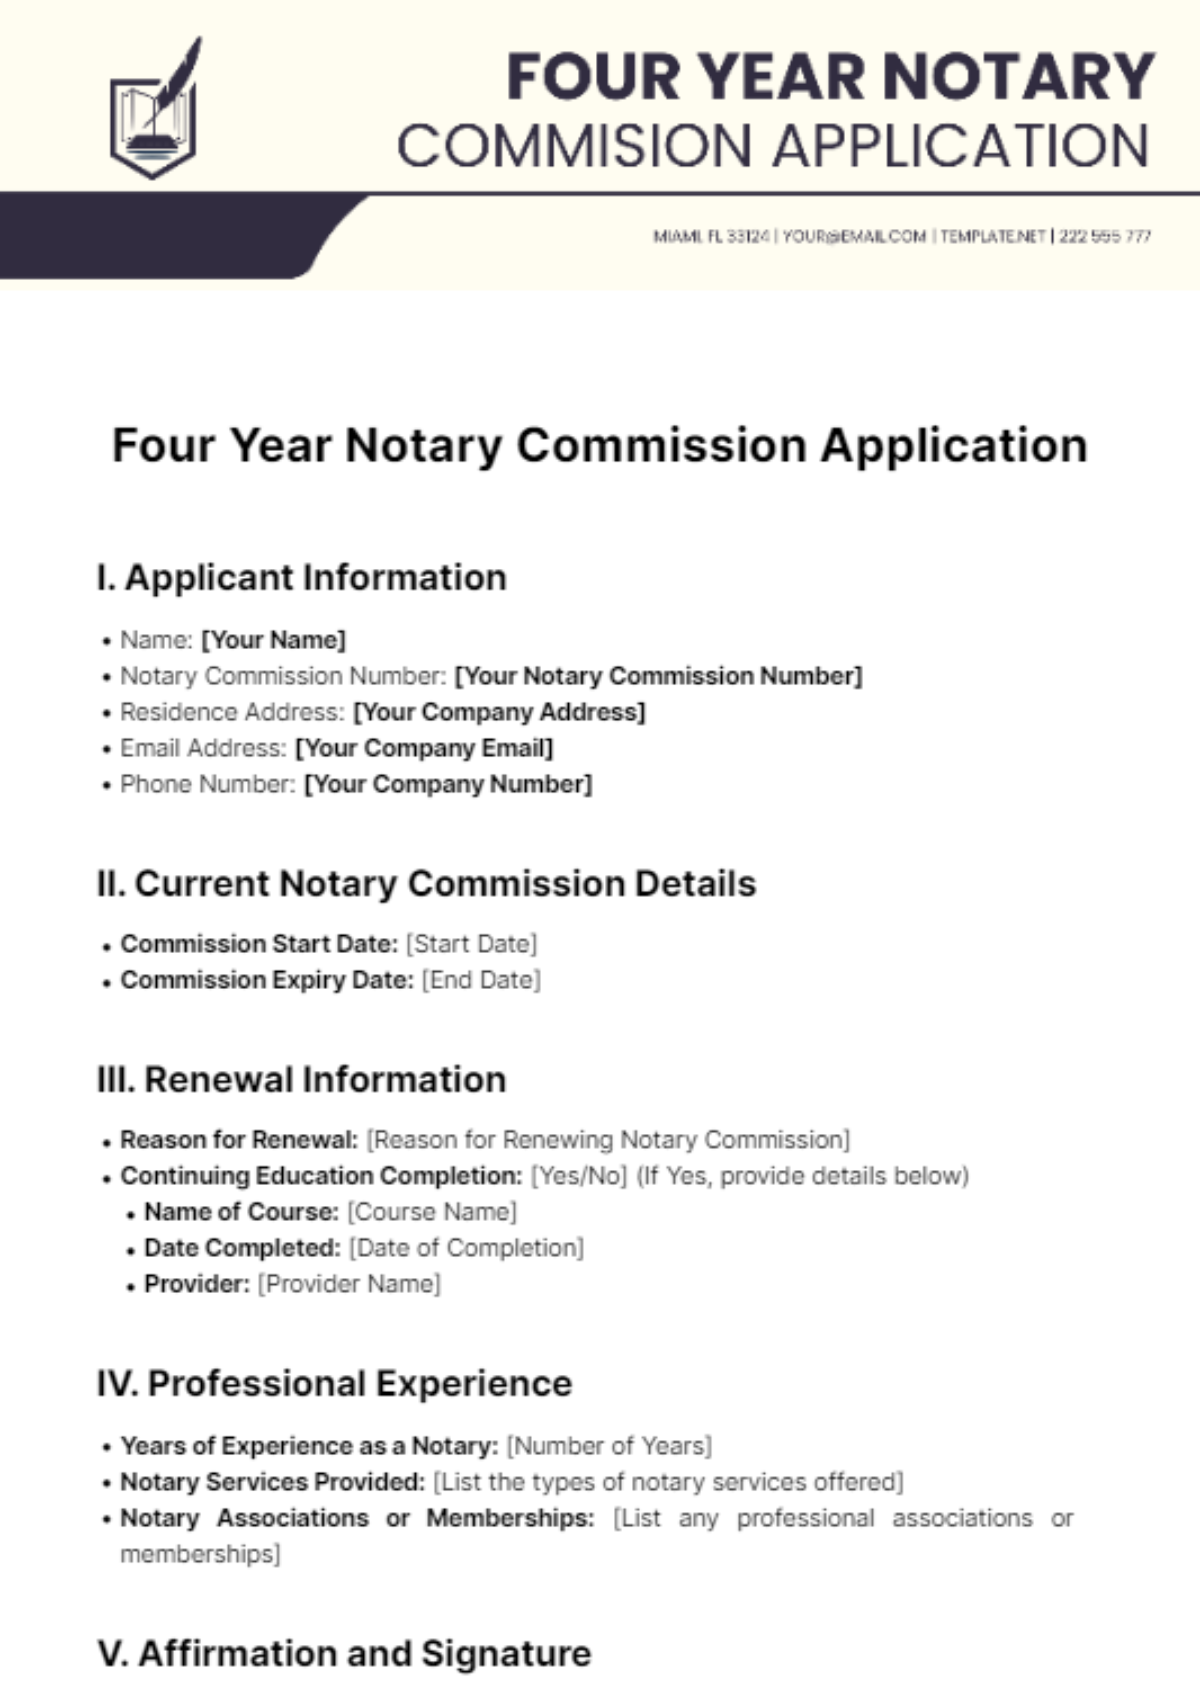 Four Year Notary Commission Application Template